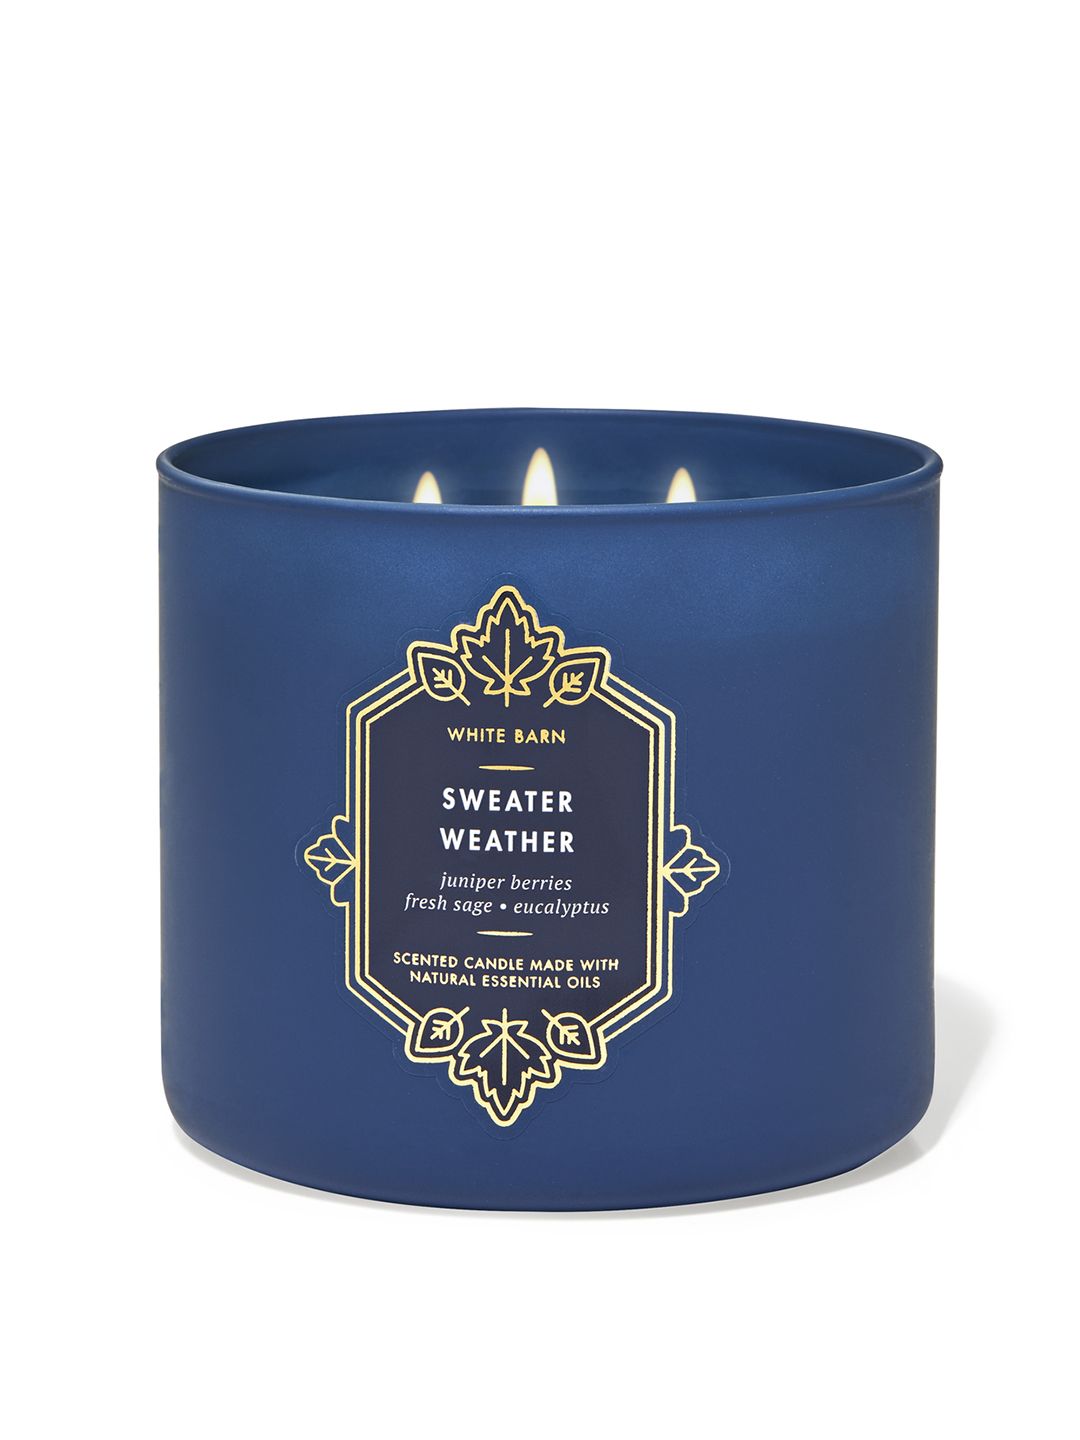 Bath & Body Works Sweater Weather 3-Wick Scented Candle with Essential Oils - 411g Price in India